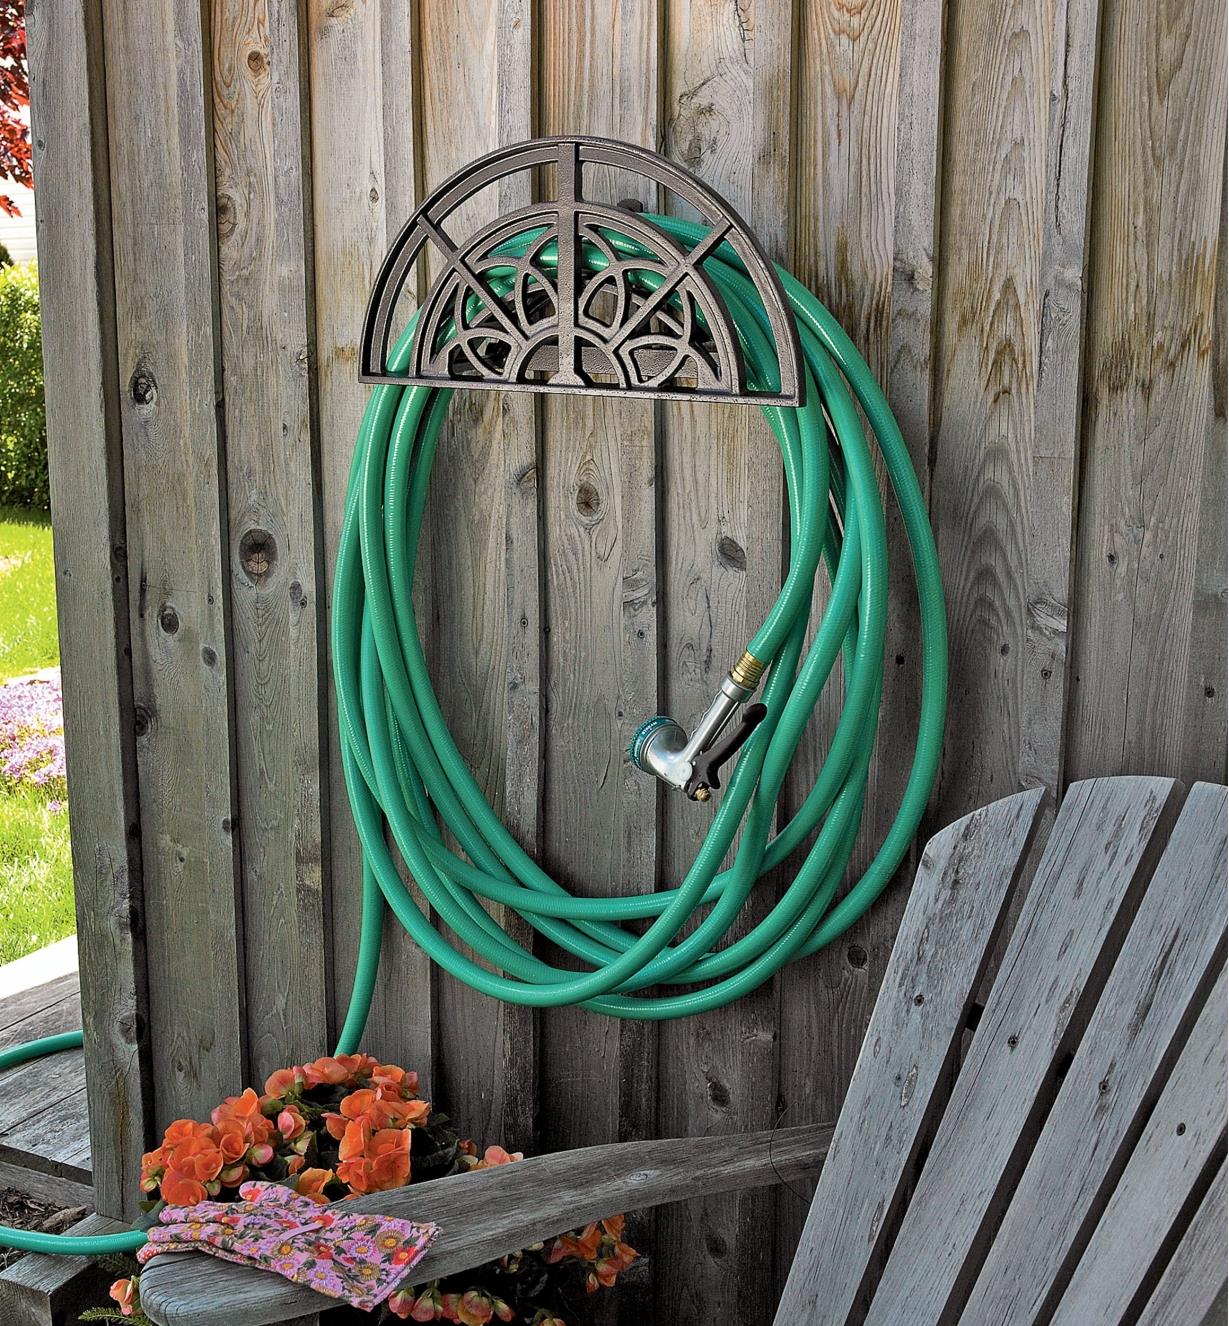 Classic Hose Hanger mounted on a wall, with a hose looped around it